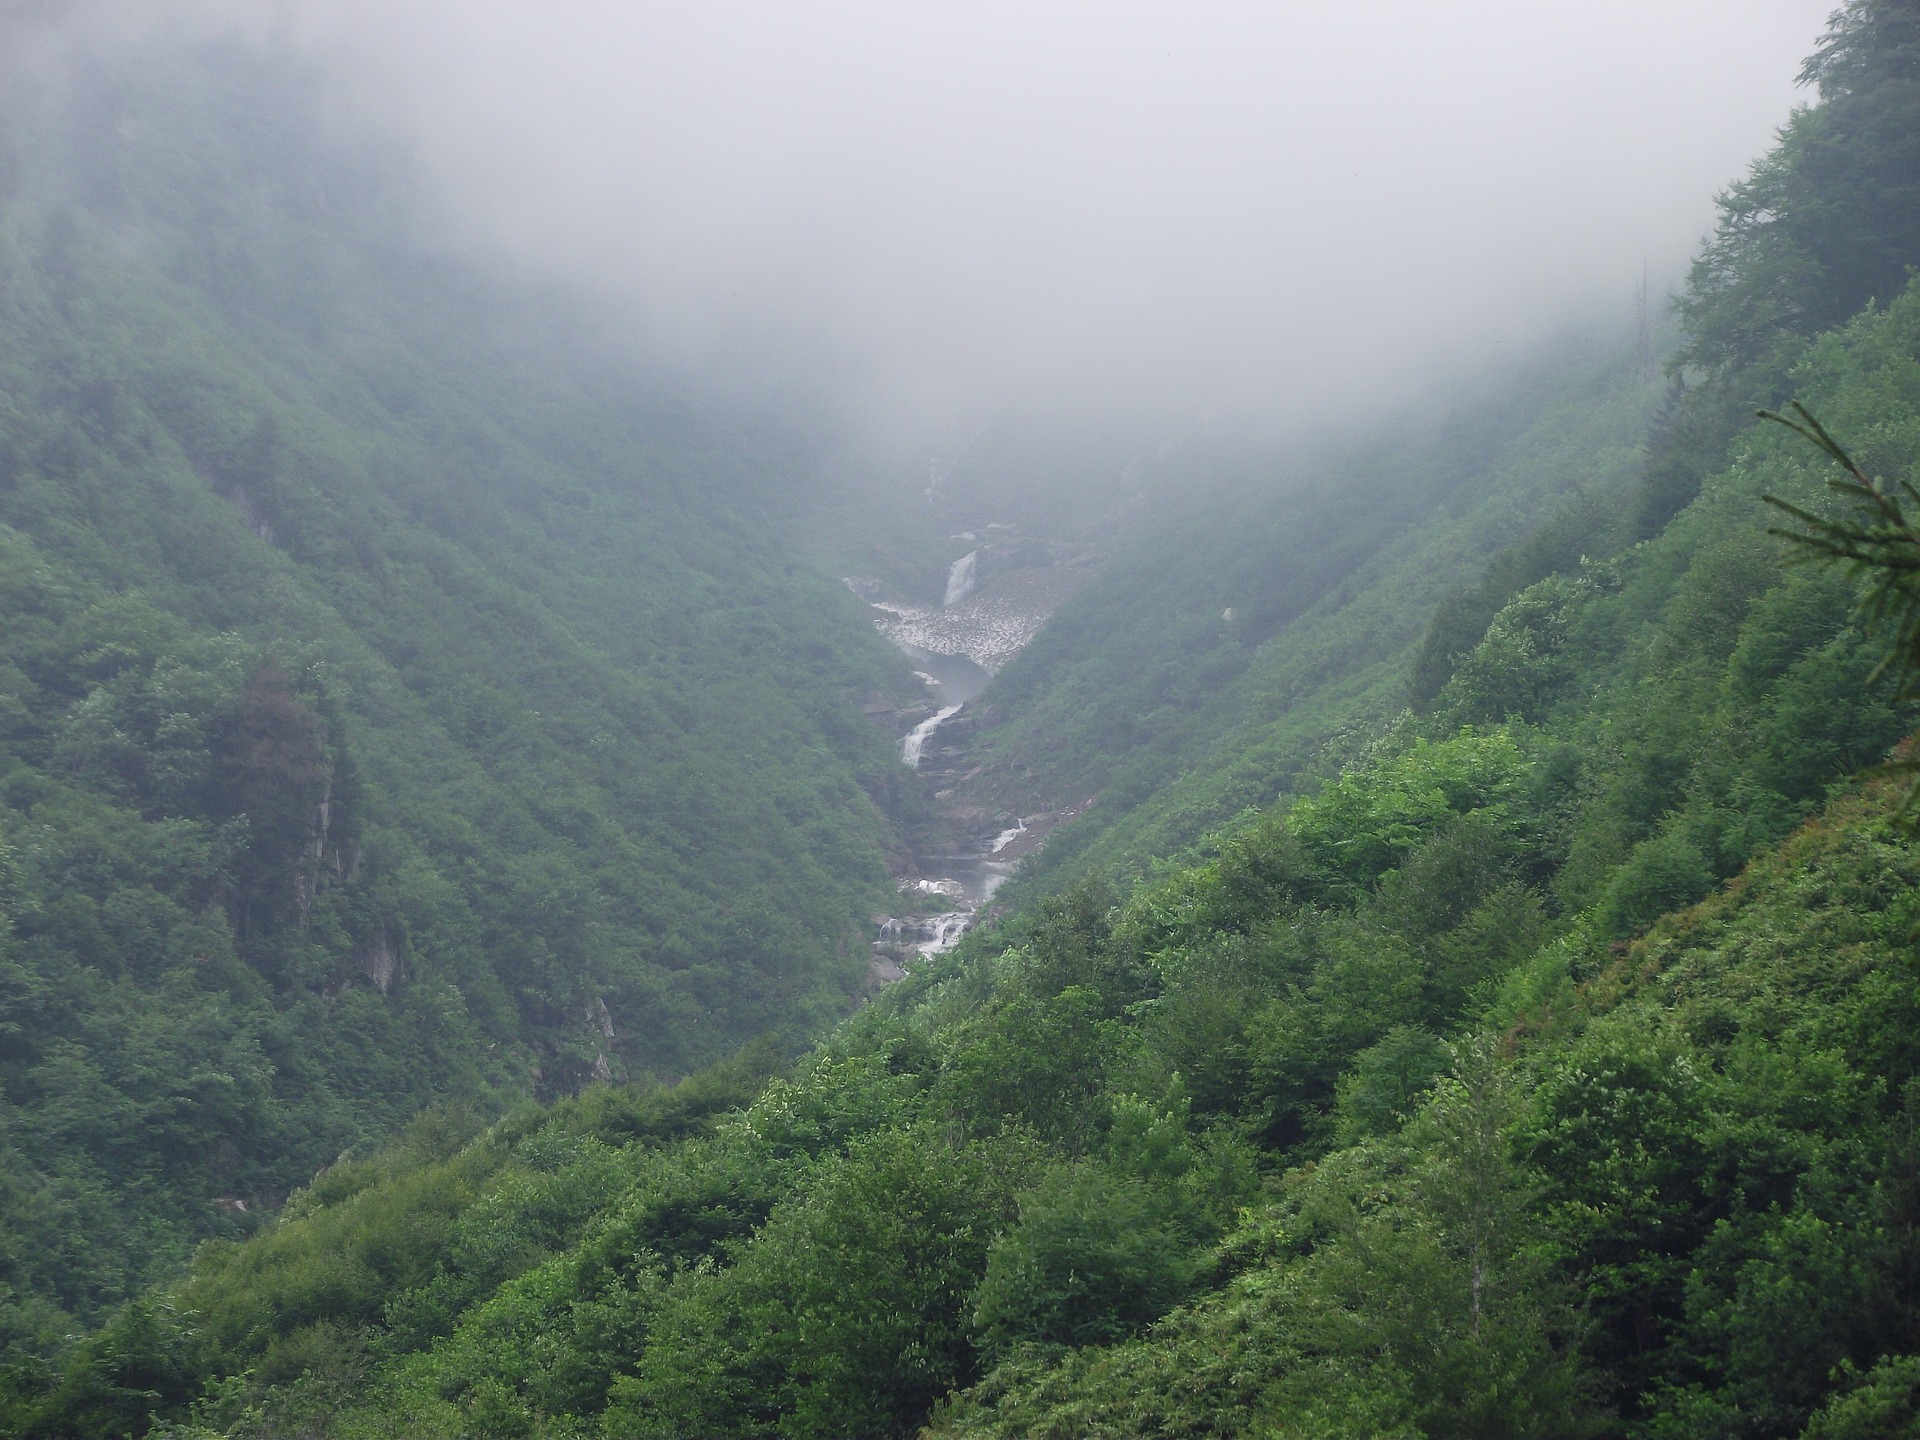 Ayder Tour – An Unforgettable Journey in the Beauty of Nature – Departing from Trabzon